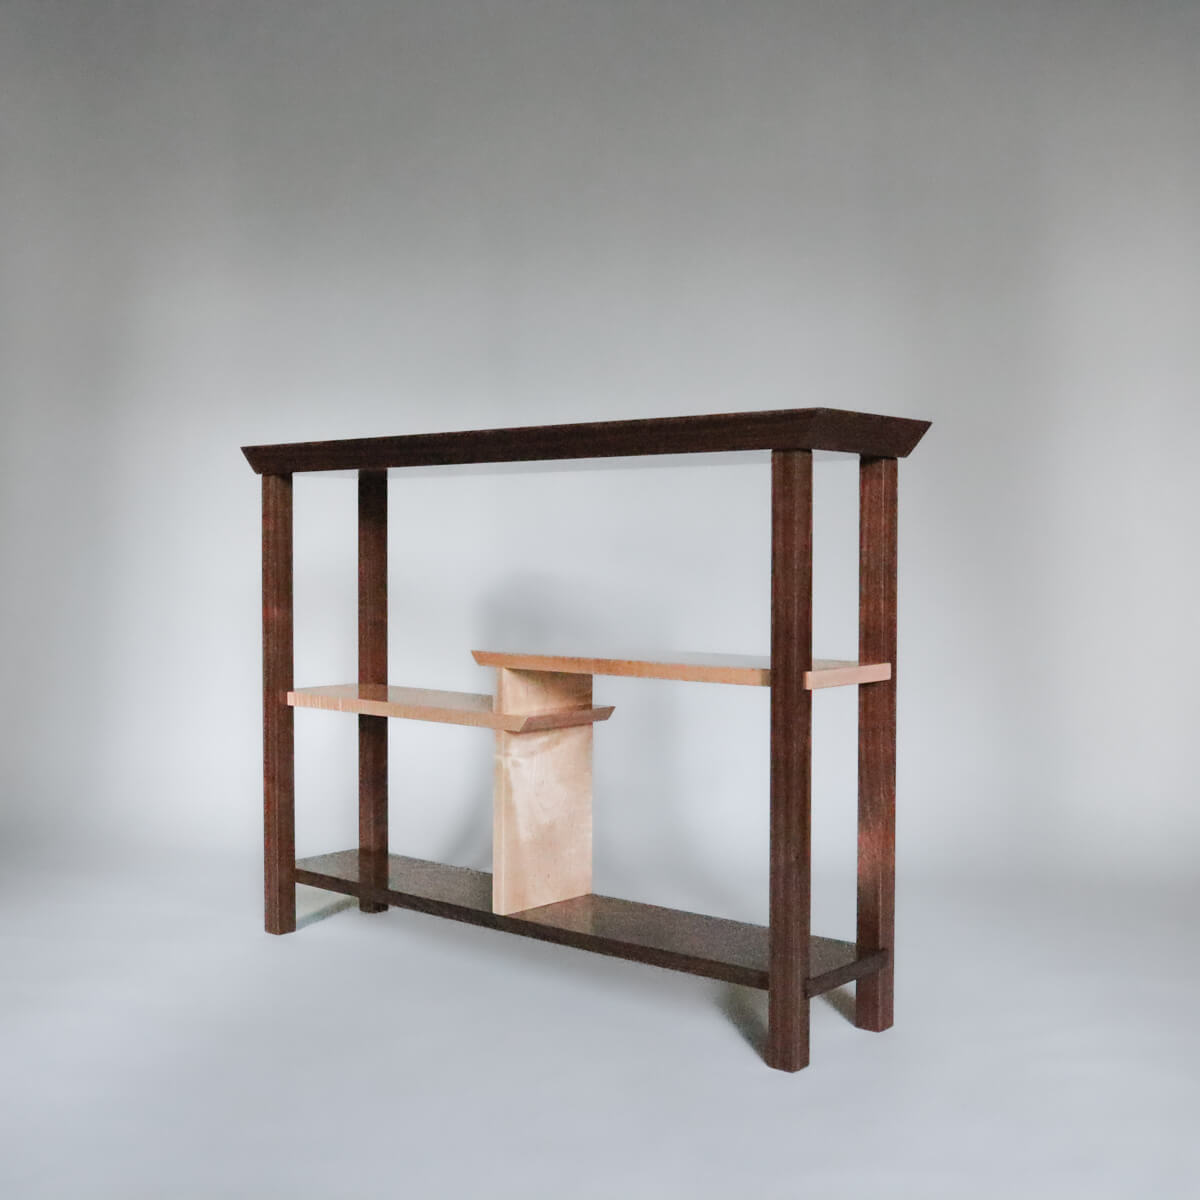 a narrow walnut console table with tiger maple shelves by Mokuzai Furniture